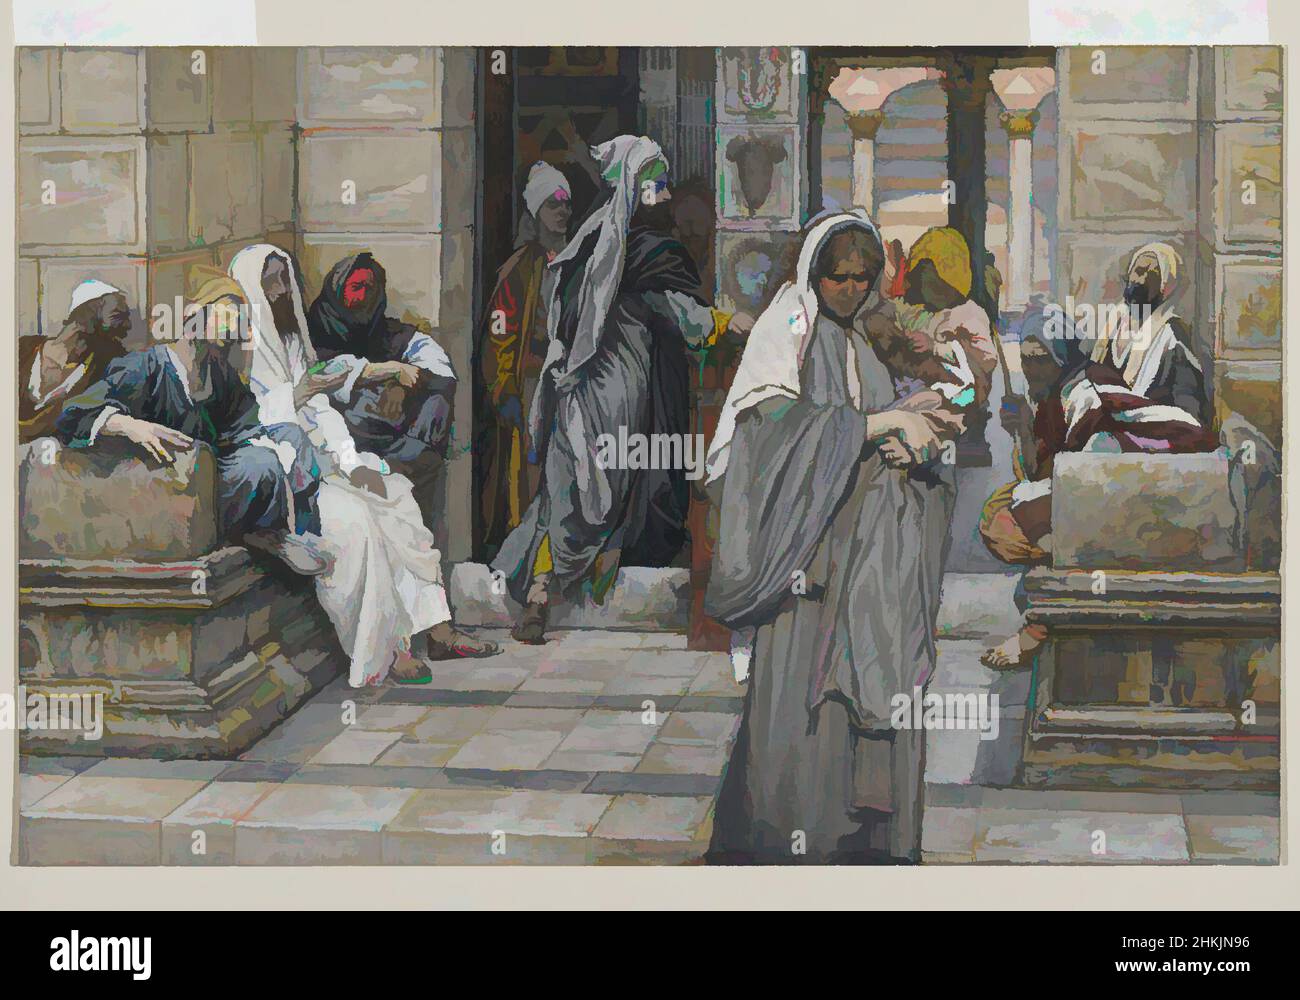 Art inspired by The Widow's Mite, Le denier de la veuve, The Life of Our Lord Jesus Christ, La Vie de Notre-Seigneur Jésus-Christ, James Tissot, French, 1836-1902, Opaque watercolor over graphite on gray wove paper, France, 1886-1894, Image: 7 3/16 x 11 1/16 in., 18.3 x 28.1 cm, child, Classic works modernized by Artotop with a splash of modernity. Shapes, color and value, eye-catching visual impact on art. Emotions through freedom of artworks in a contemporary way. A timeless message pursuing a wildly creative new direction. Artists turning to the digital medium and creating the Artotop NFT Stock Photo